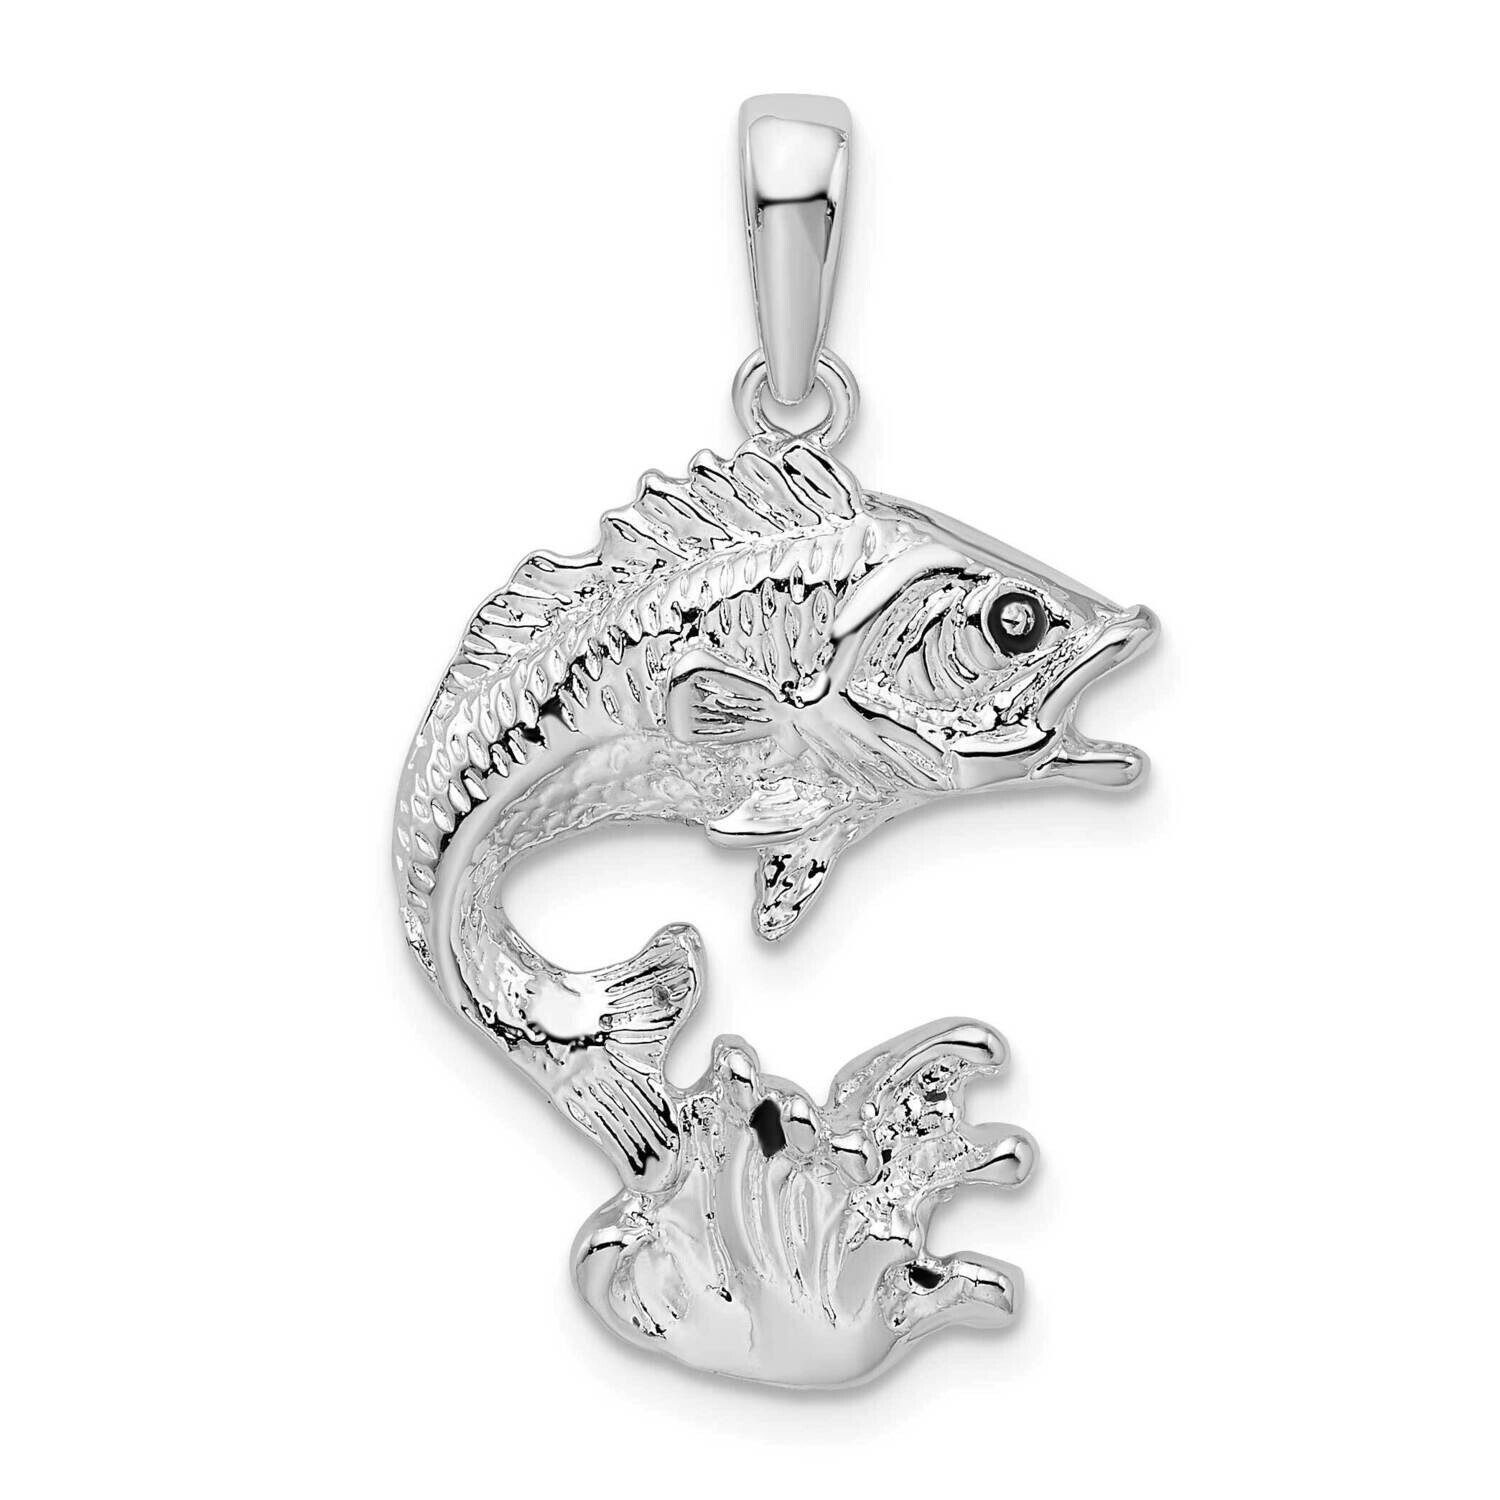 Jumping Bass Fish Pendant Sterling Silver Polished QC10407